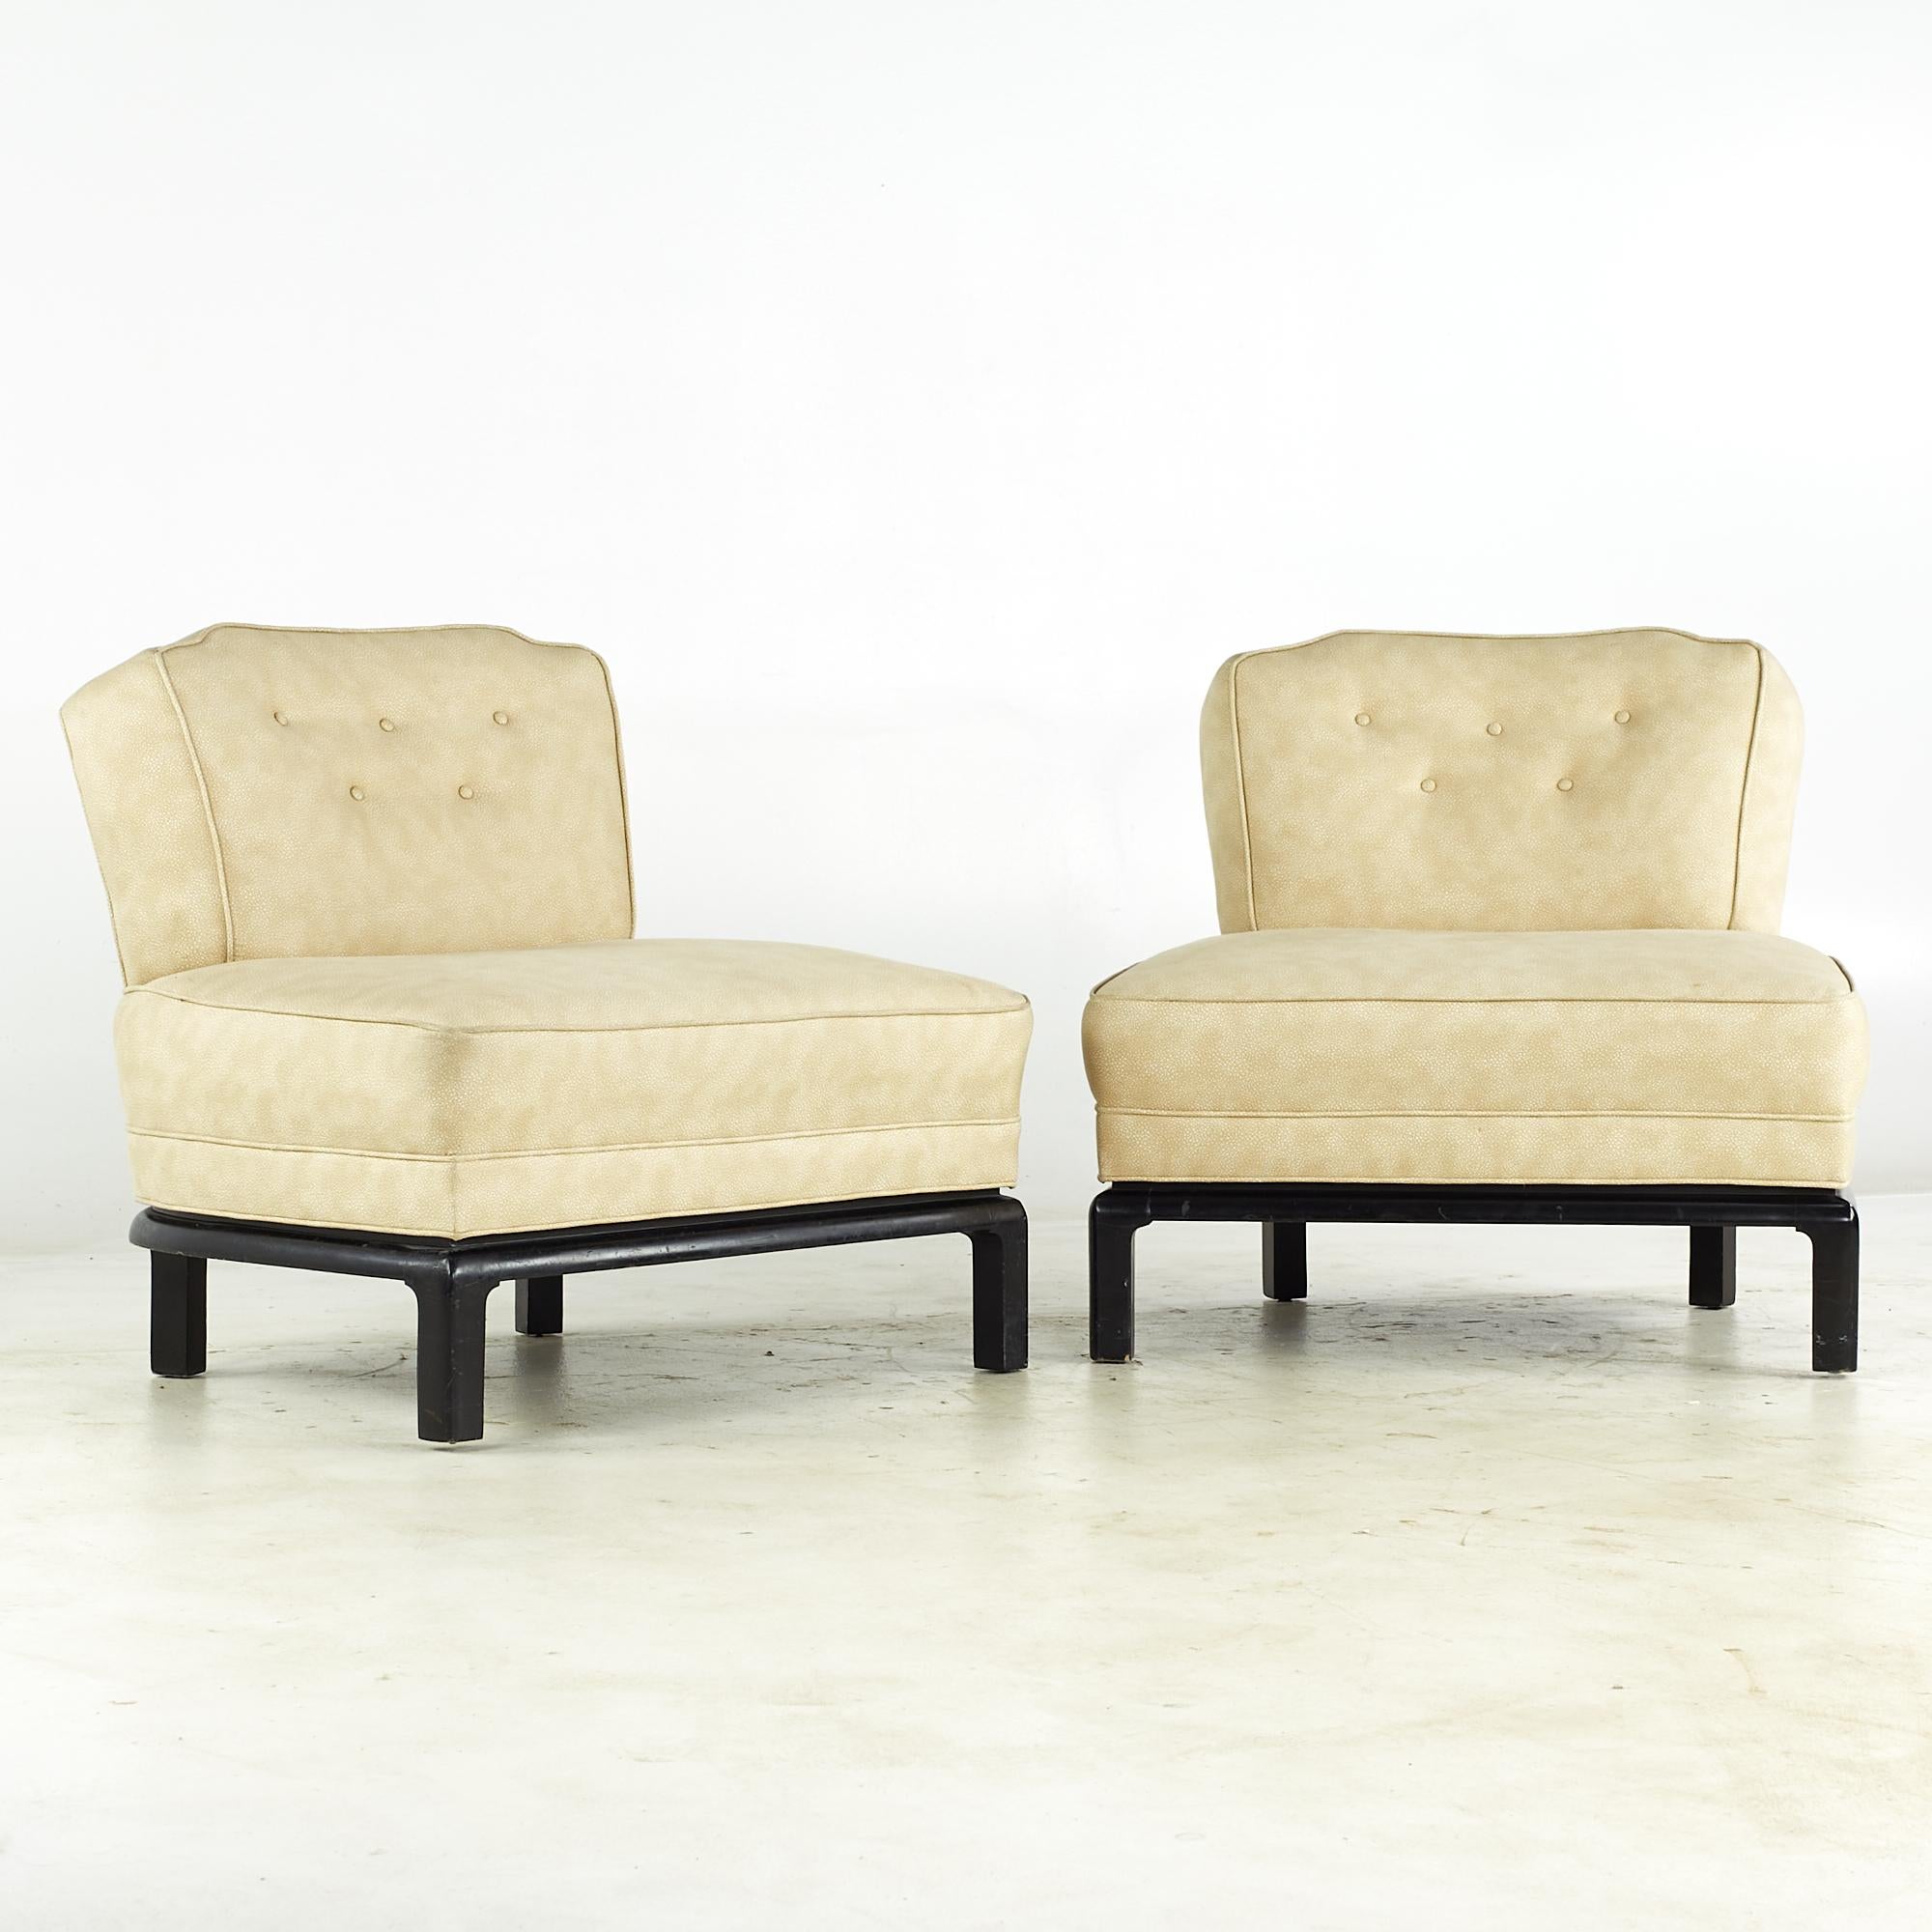 Michael Taylor for Baker midcentury Slipper Lounge Chairs - Pair

Each chair measures: 32 wide x 26 deep x 30 high, with a seat height of 16.5 inches

All pieces of furniture can be had in what we call restored vintage condition. That means the